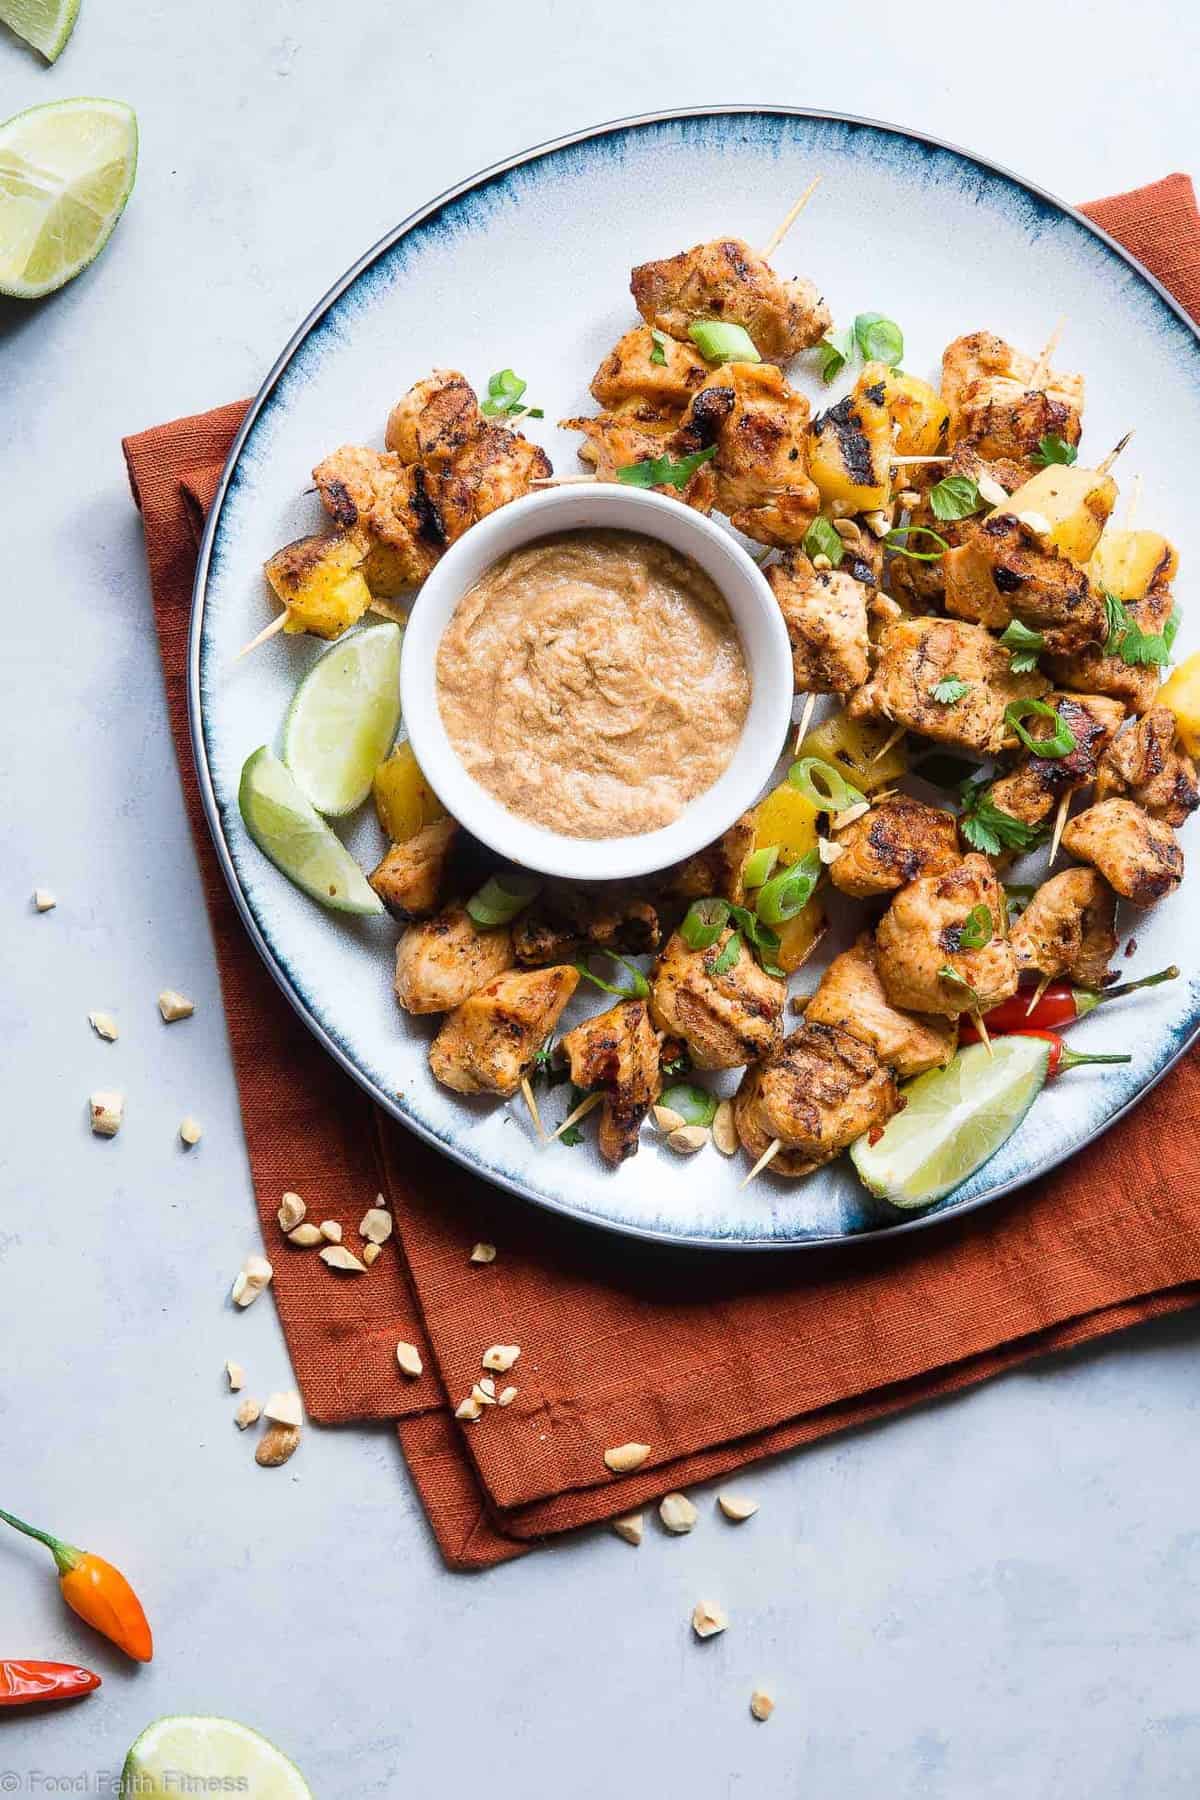 Pineapple Thai Grilled Chicken Skewers with Peanut Sauce - Addictingly spicy, with just a bit of smoky and sweet! The perfect healthy, gluten free dinner for summer with a paleo option! | #Foodfaithfitness | #Glutenfree #Paleo #Healthy #Dairyfree #Chicken